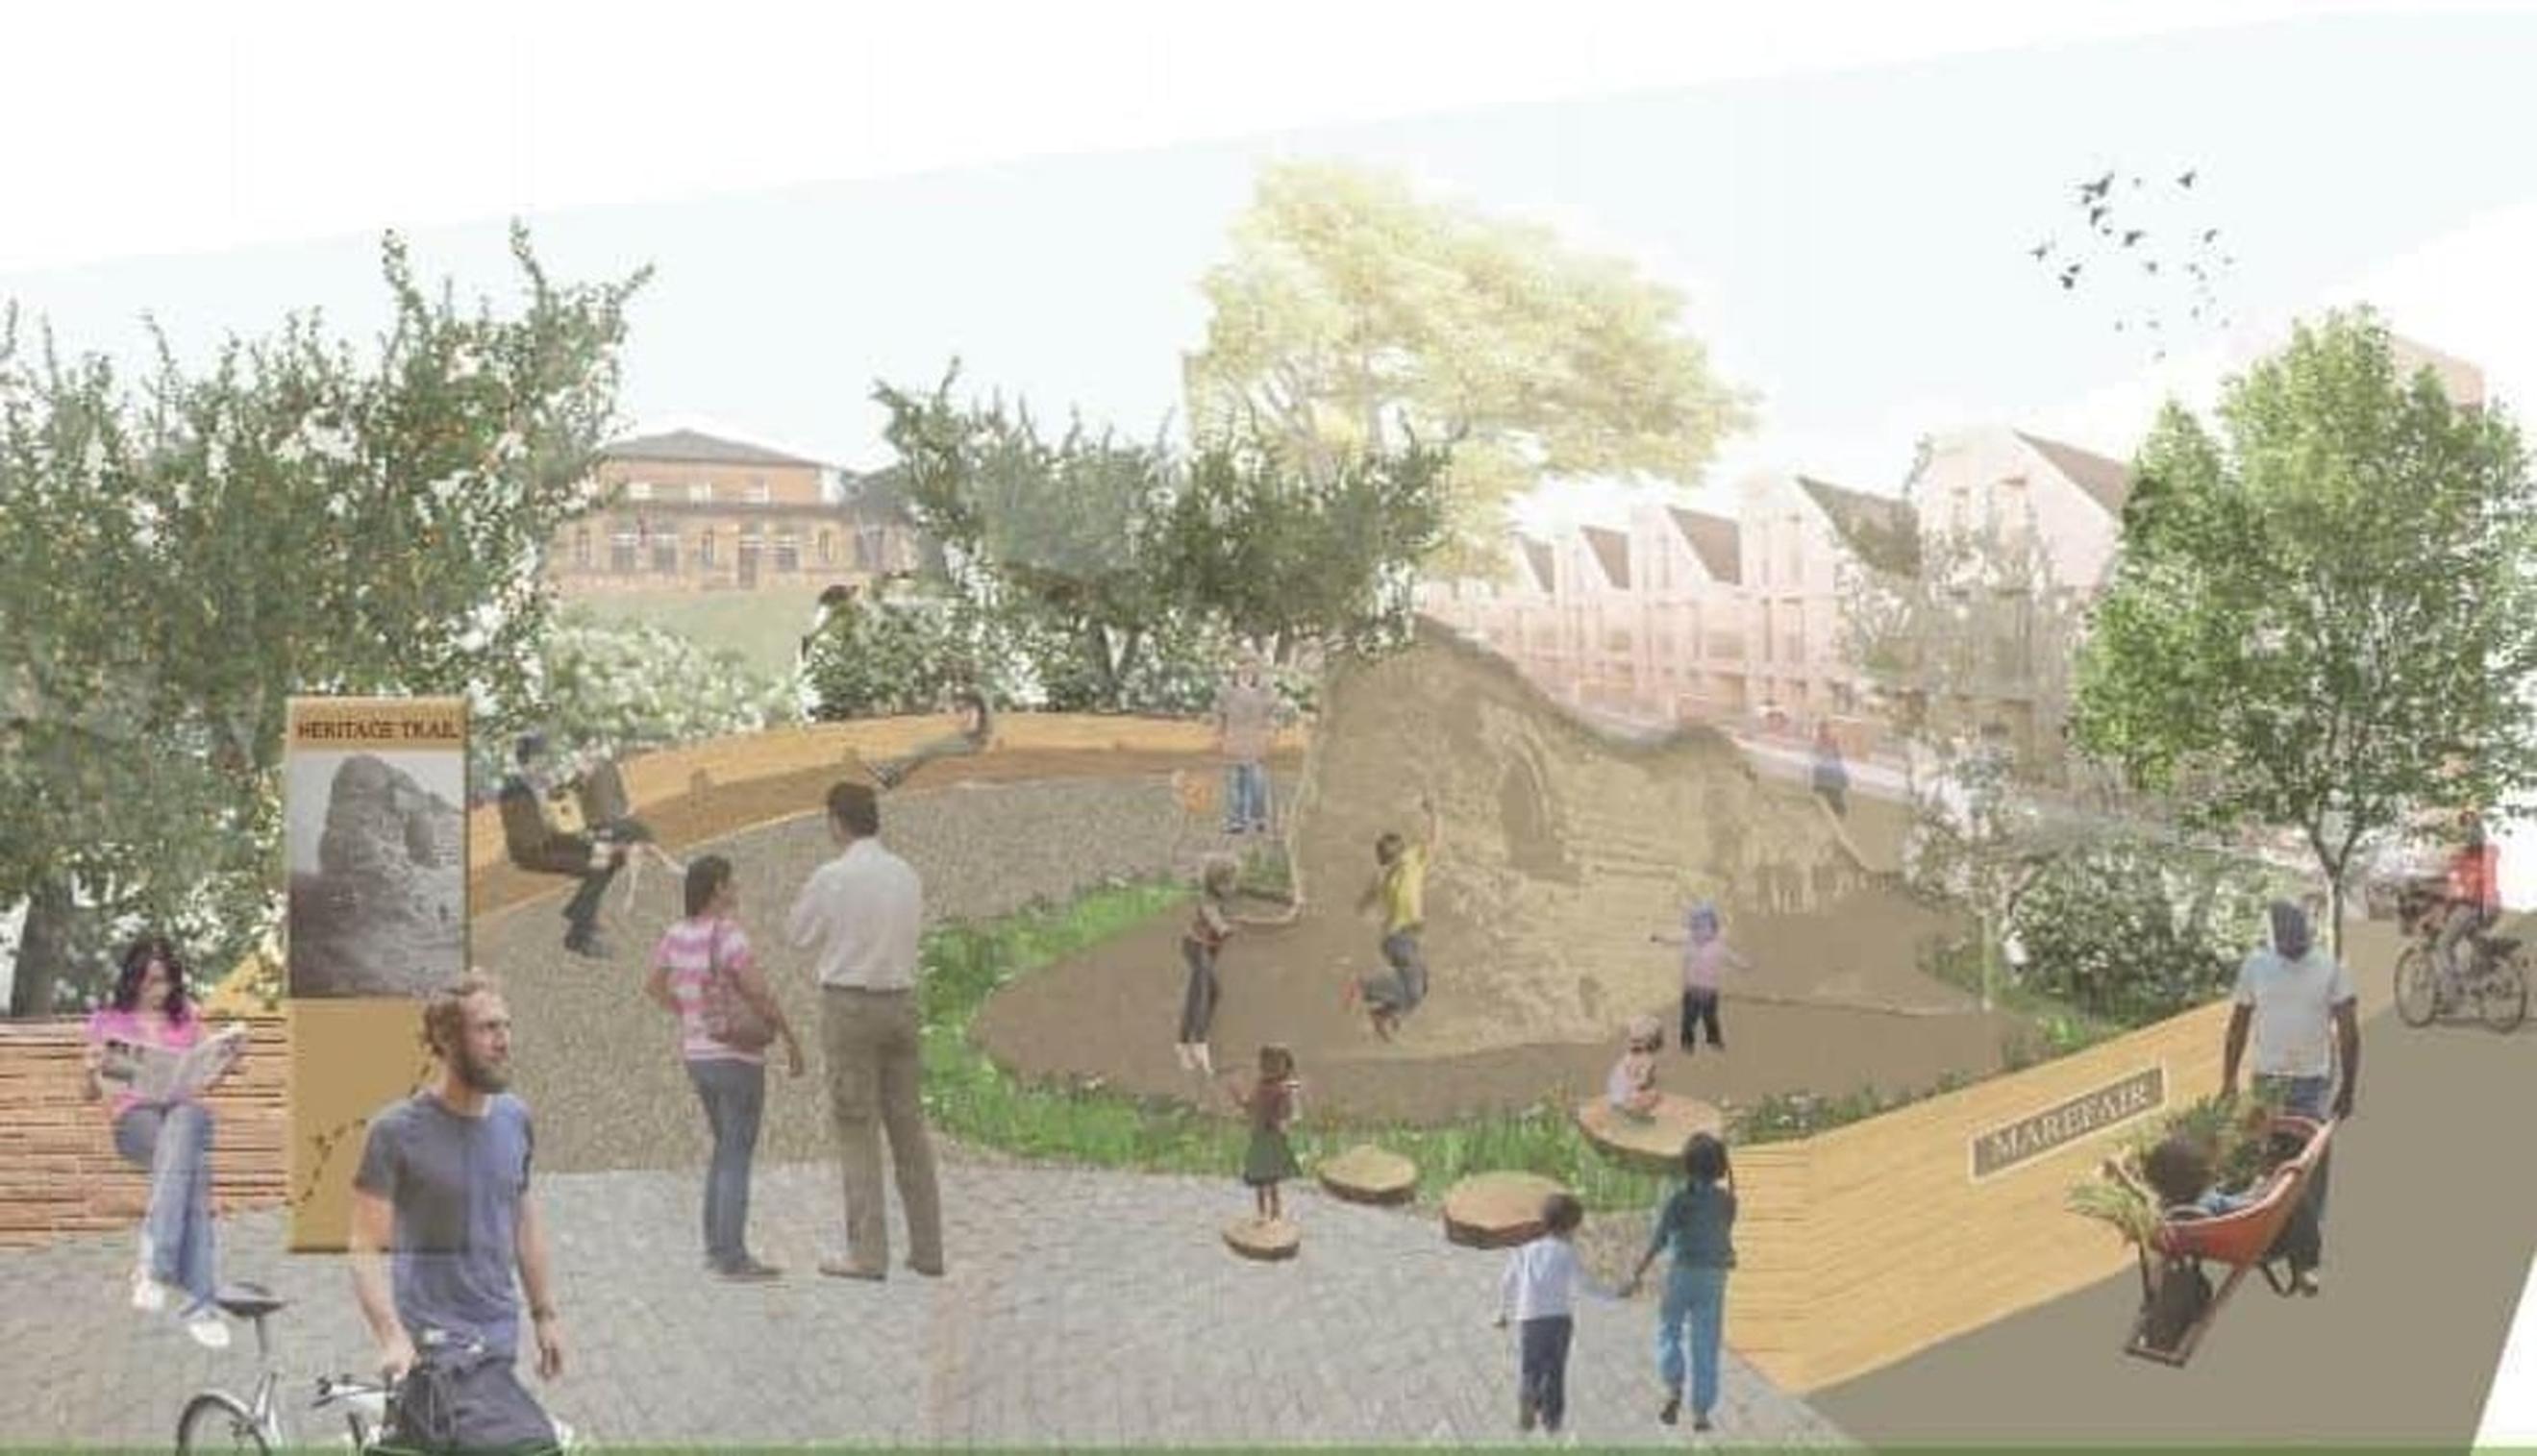 West Northamptonshire Council has secured £1.6m from the government’s Towns Fund towards the creation of a Heritage Park in Marefair